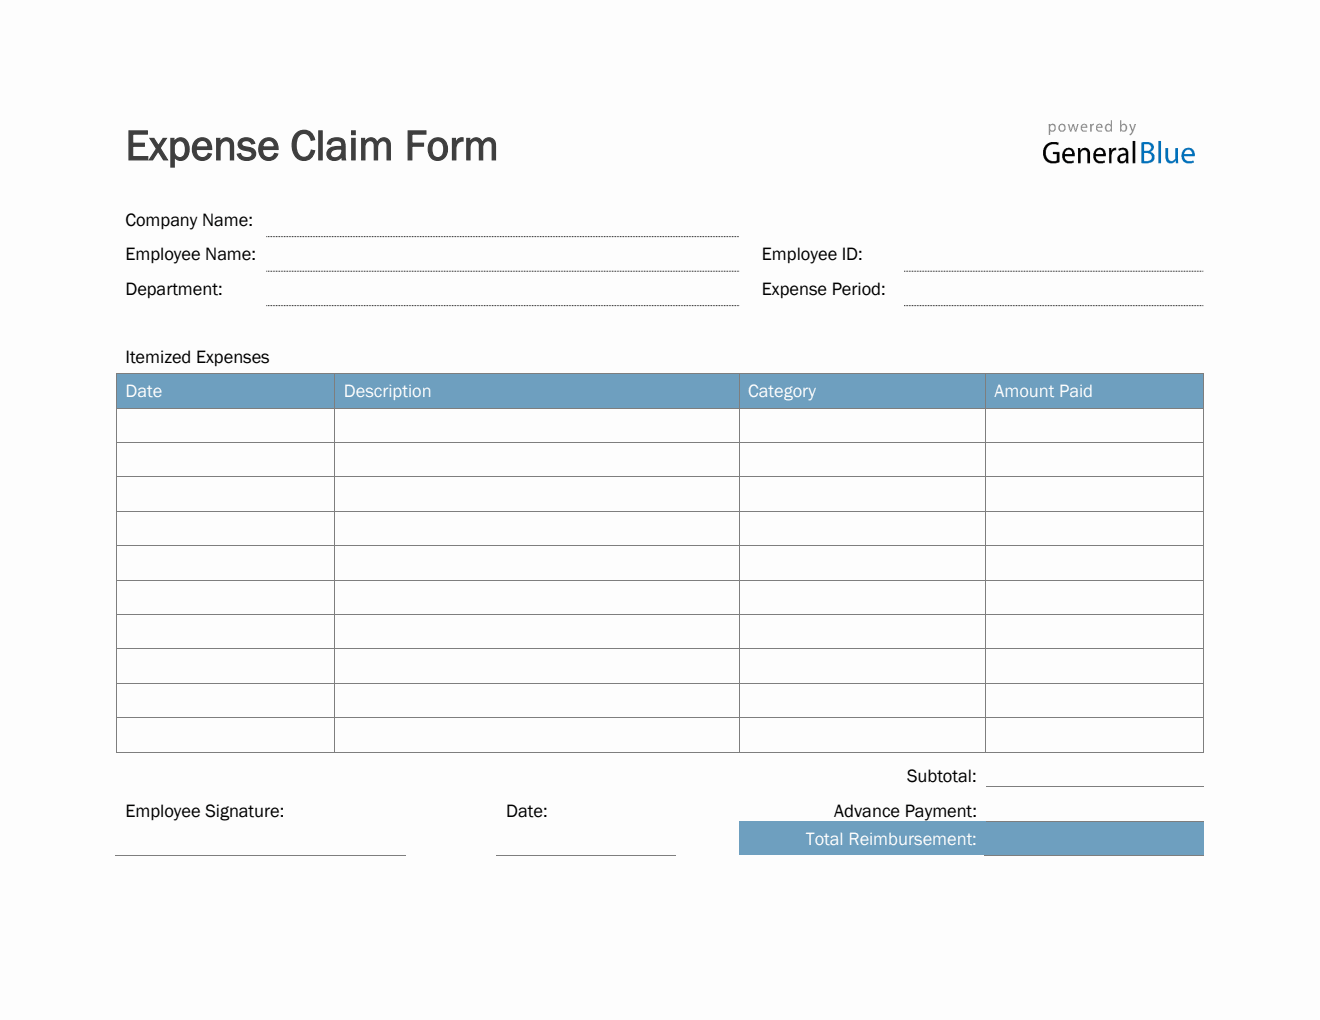 Expense Claim Form in Word (Basic)